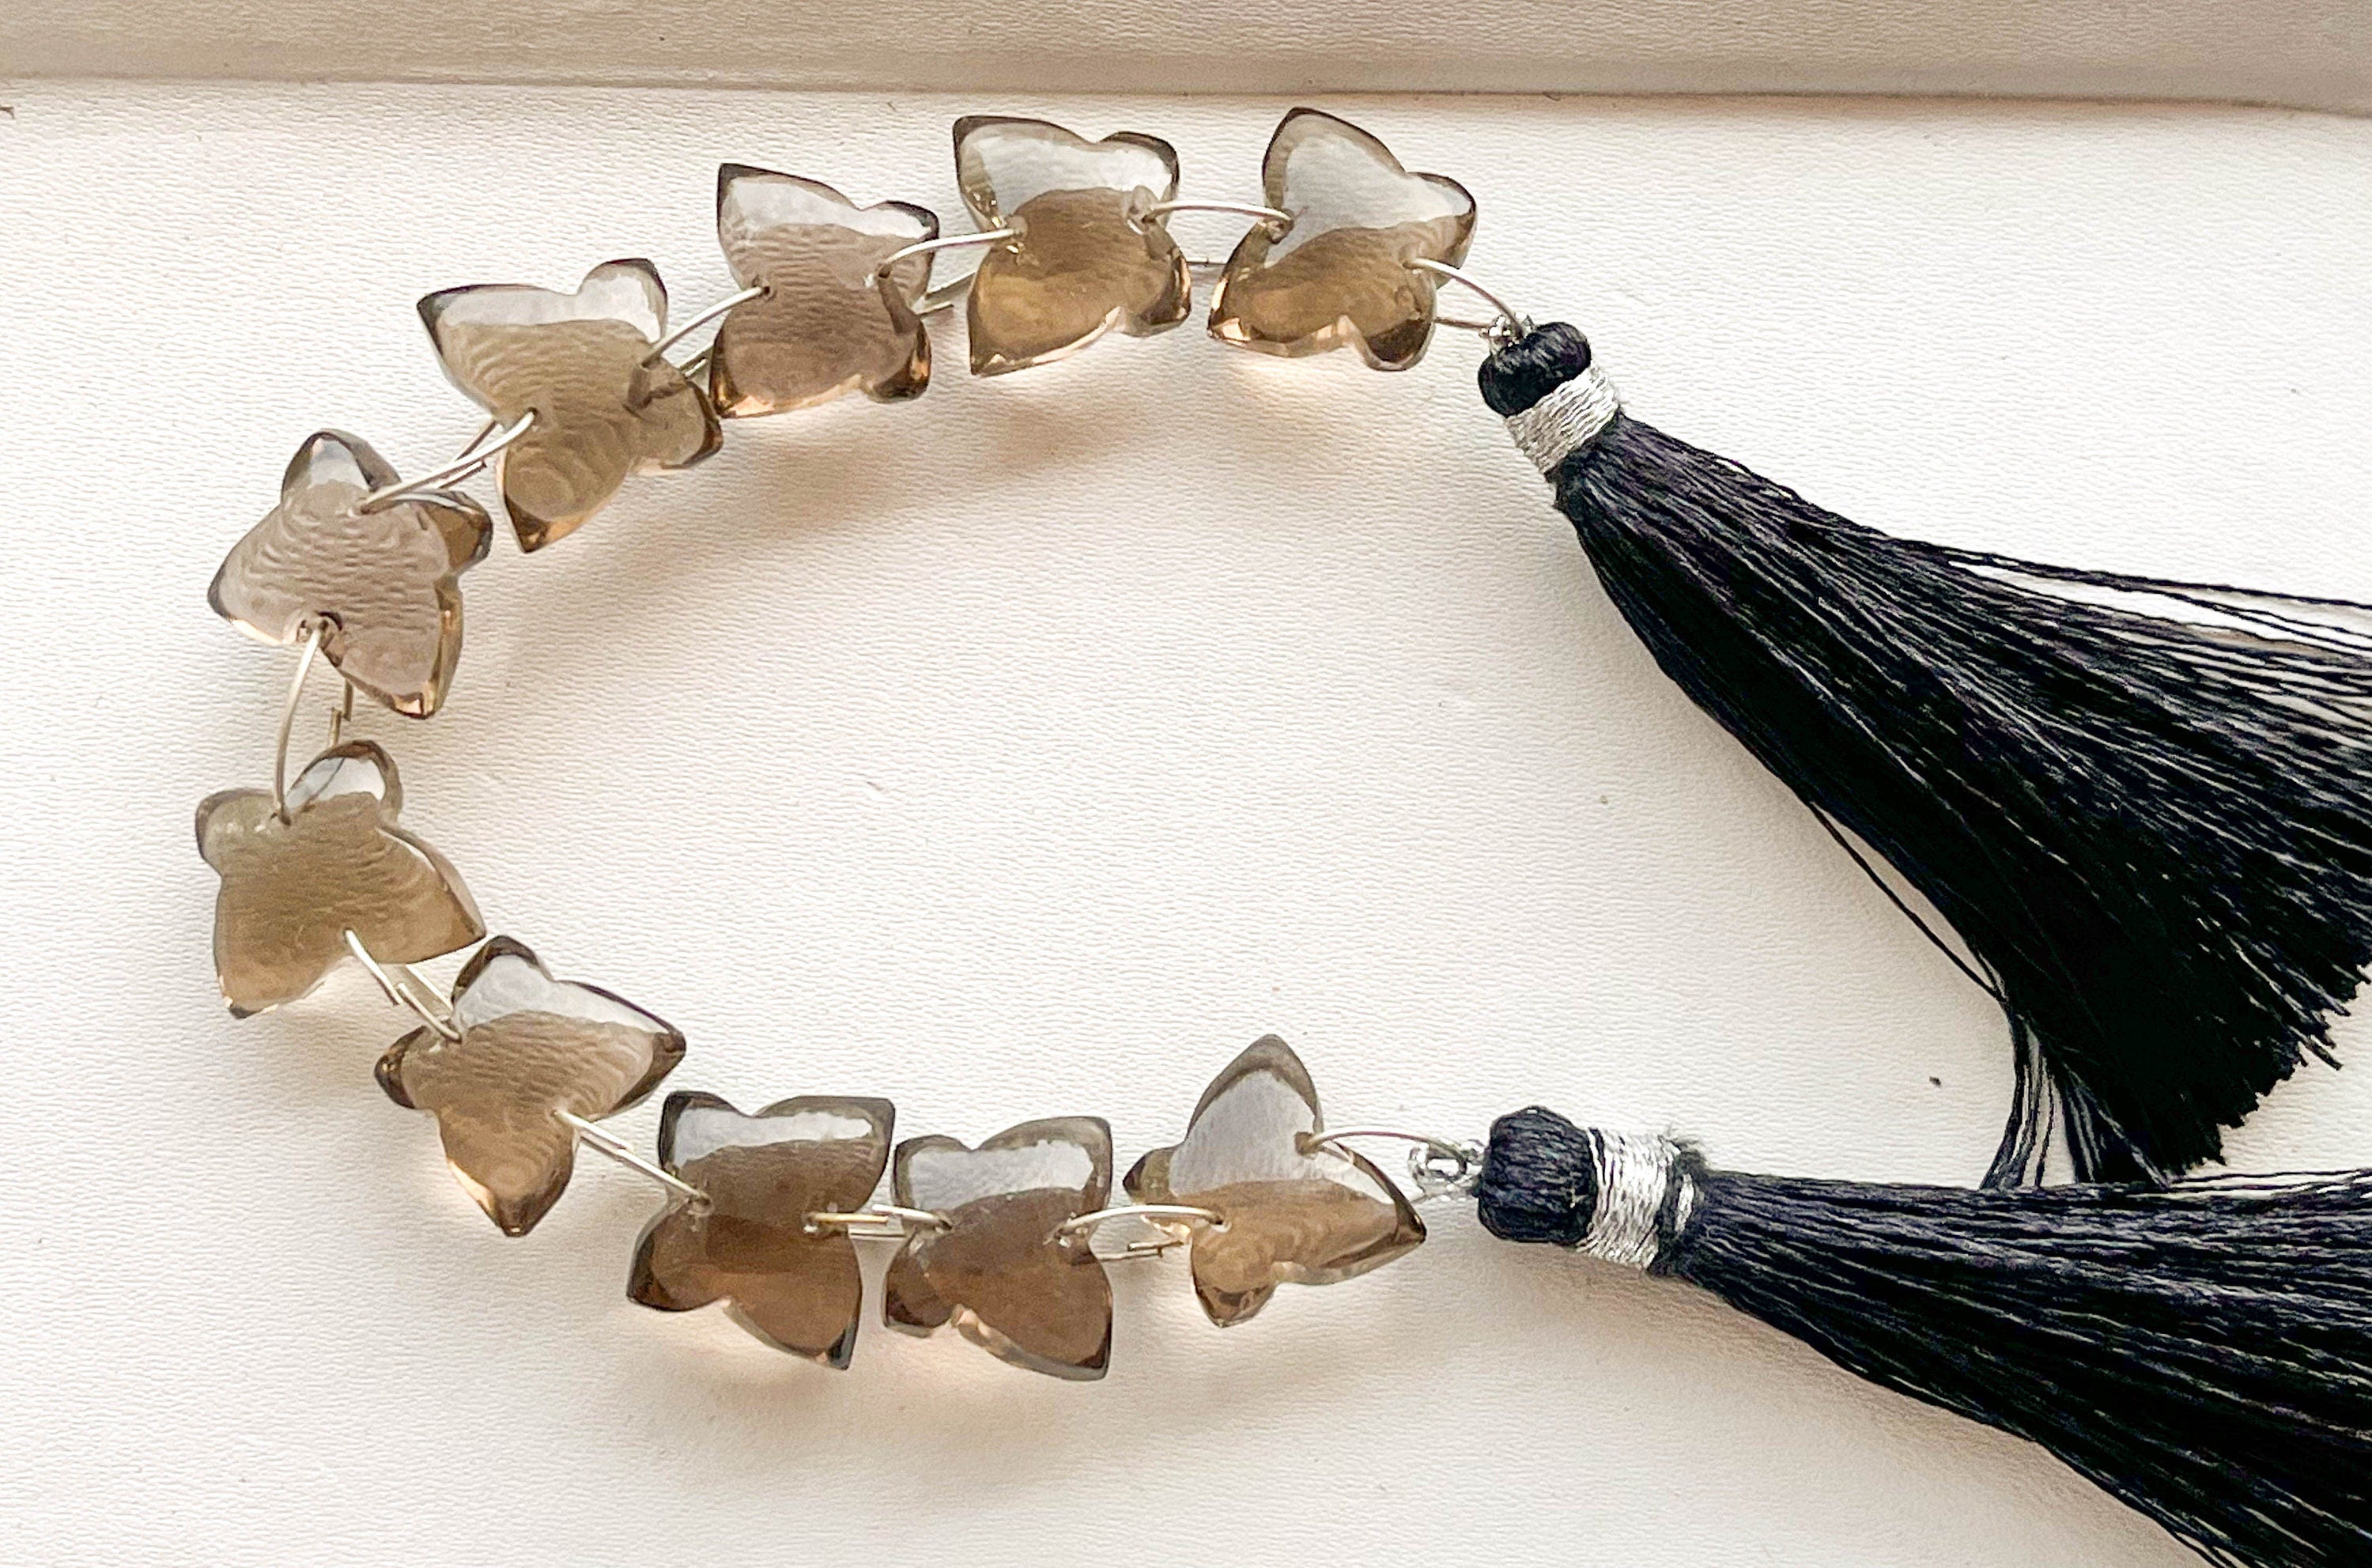 Smoky Quartz Smooth Butterfly Shape Double Drill Beads, Rare Gemstone Design for Jewelry Making, 10x12mm, 10 Pieces String Beadsforyourjewelry